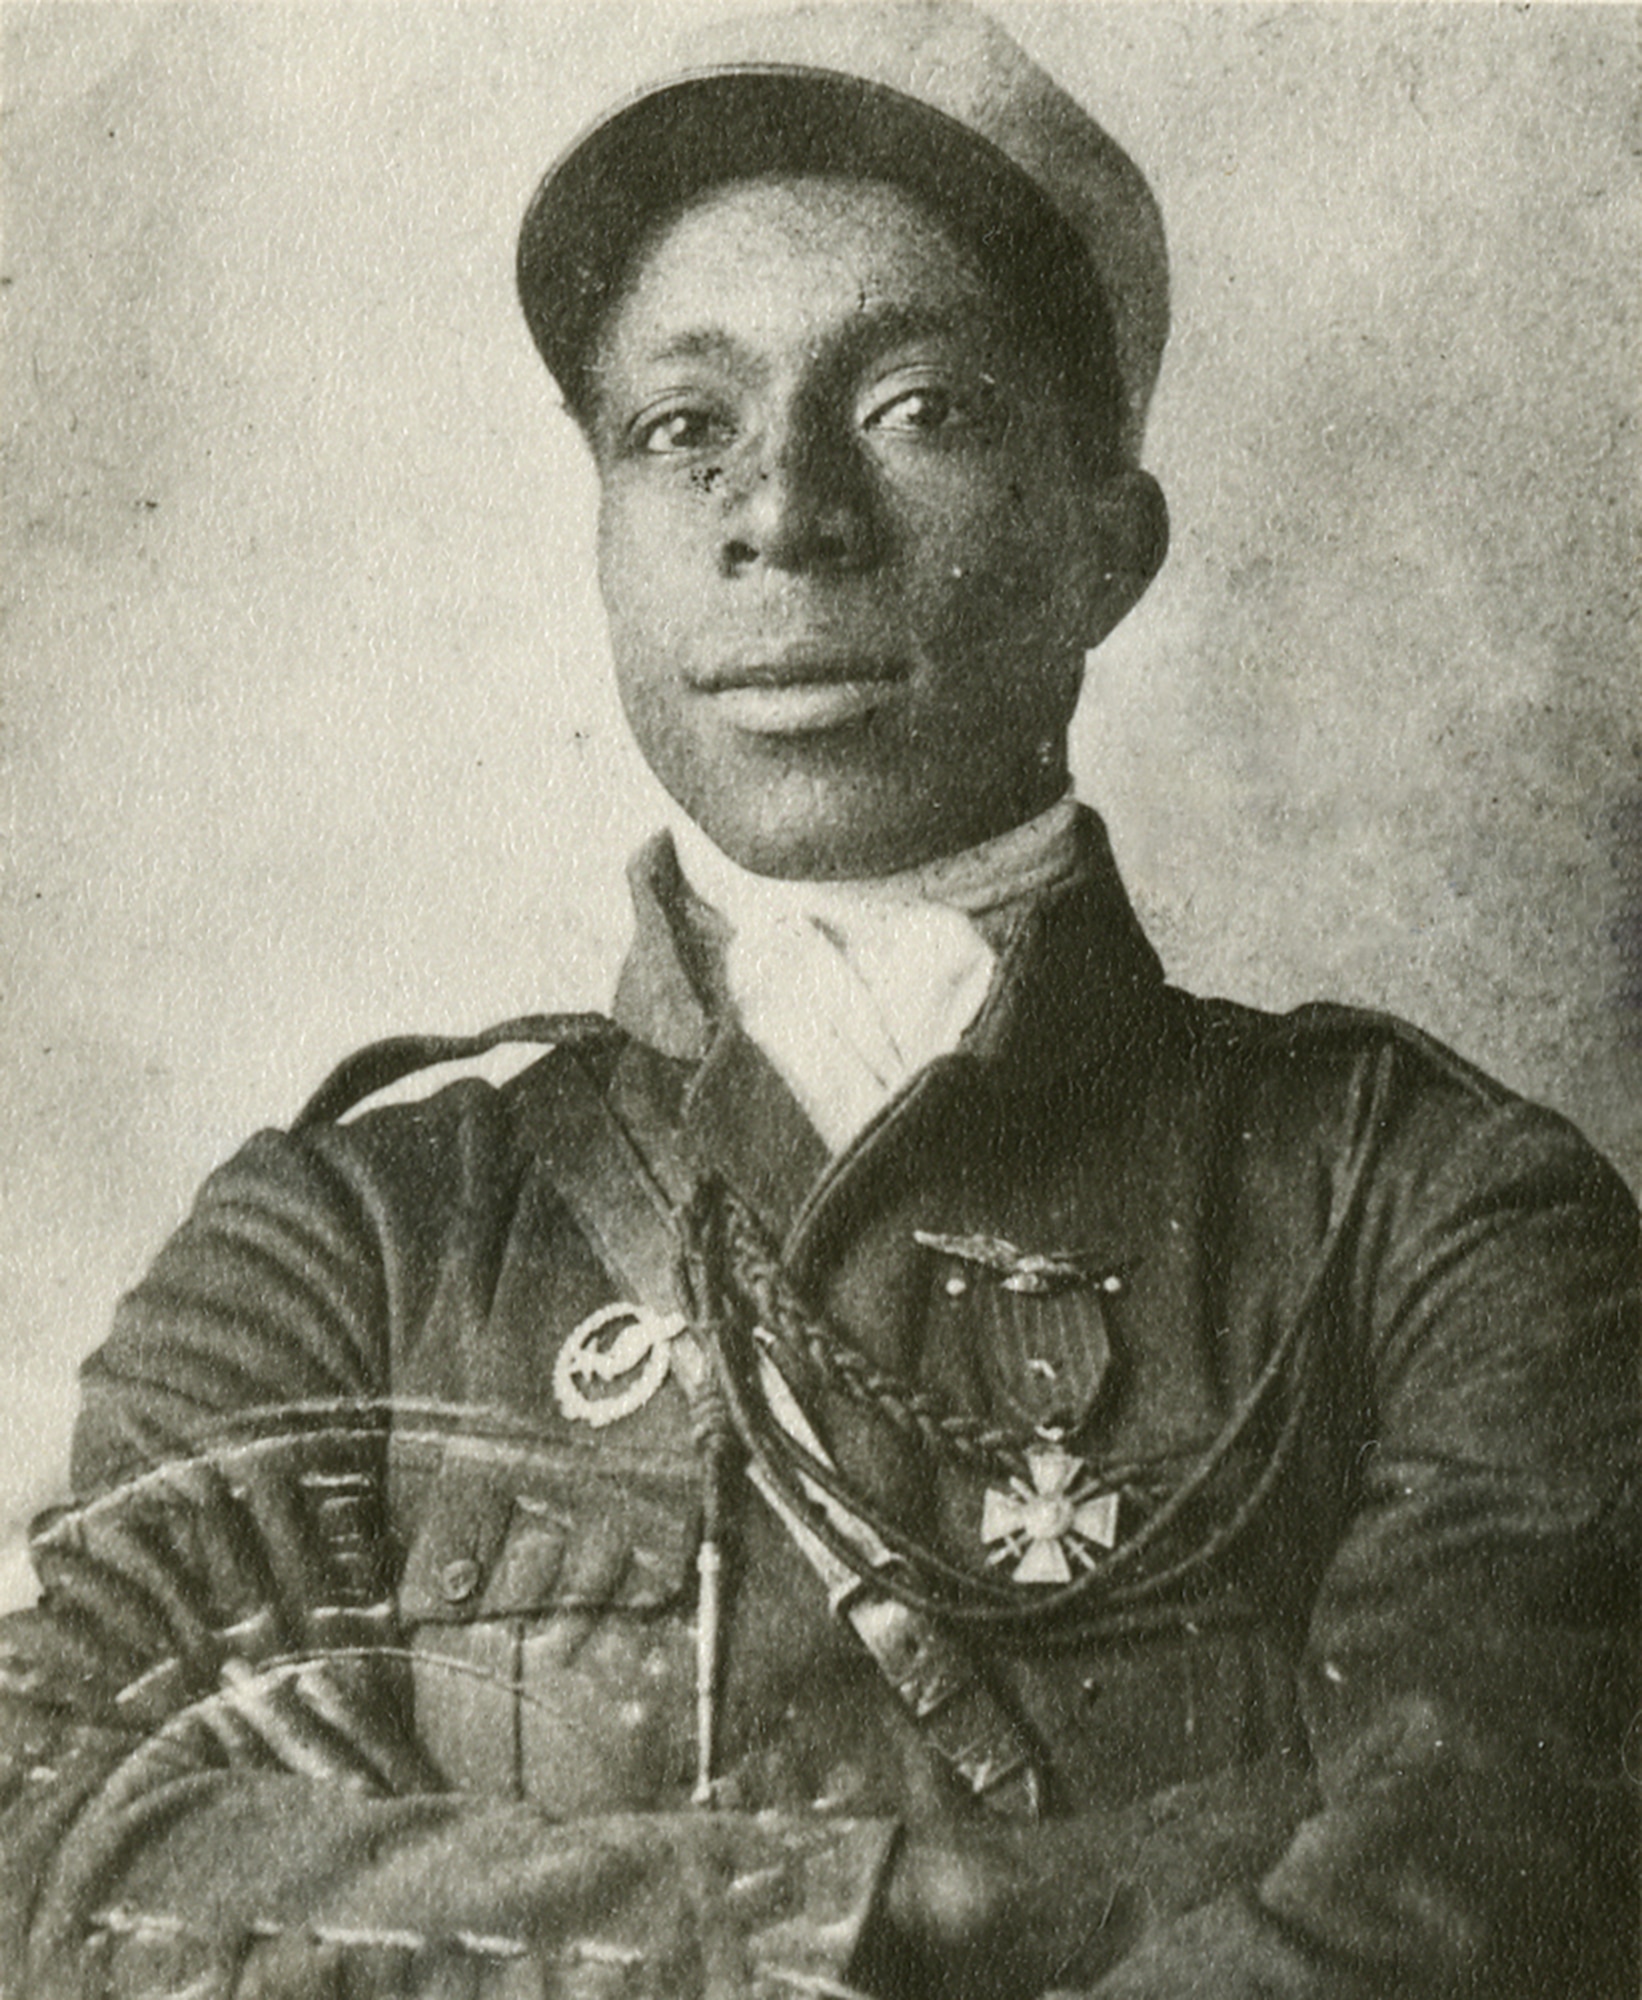 Photograph of Eugene Jacques Bullard during his flight training. The insignia on his right chest is his student pilot insignia, and the Croix de Guerre with Star he received for valor during the Battle of Verdun on his left. Just visible over the Croix de Guerre on the left are unofficial wings worn by many French pilots. (U.S. Air Force photo)